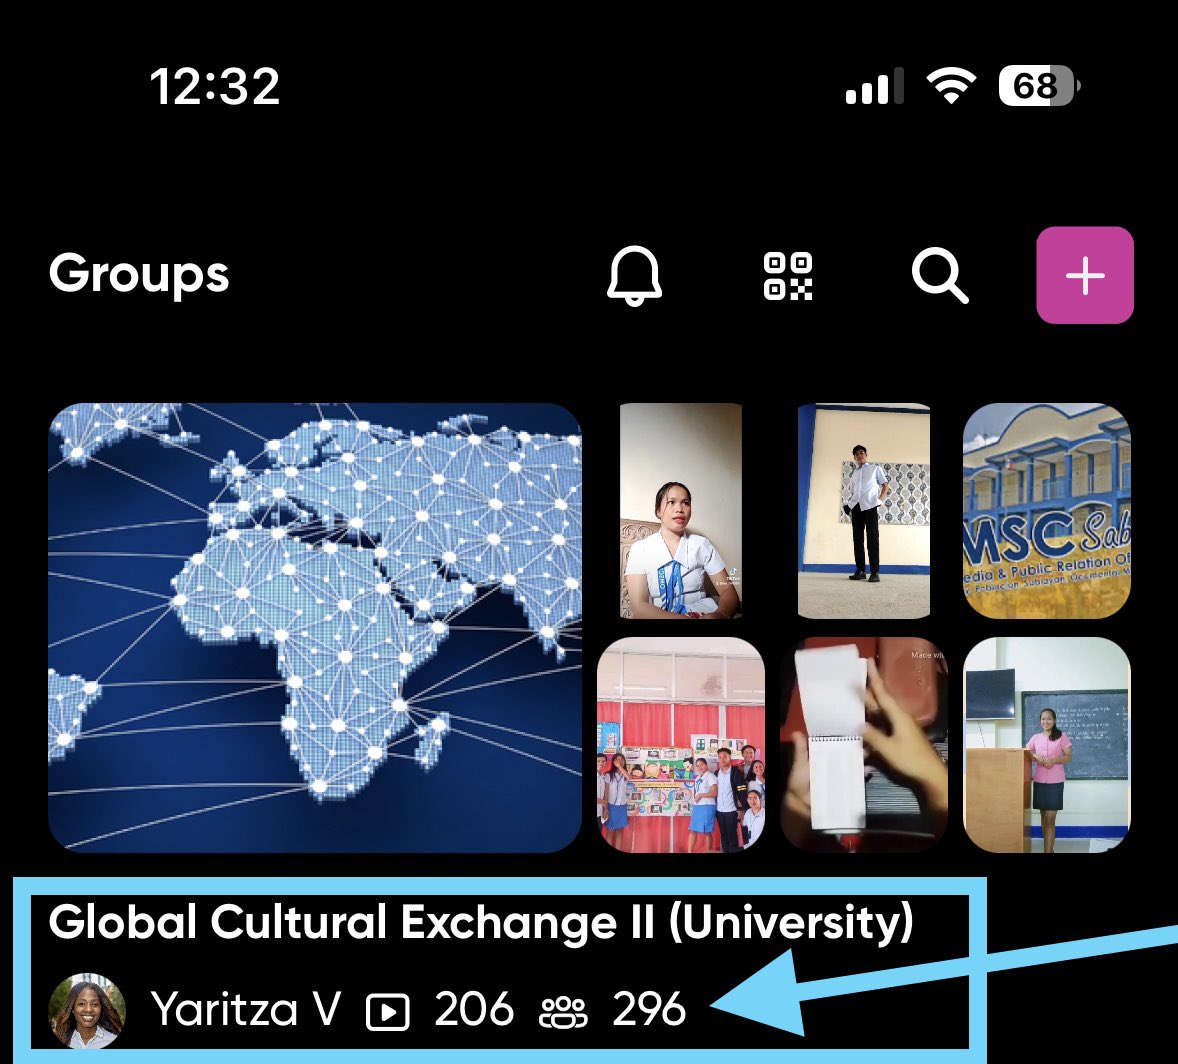 🌎@MicrosoftFlip GLOBAL CULTURAL EXCHANGE II WEEK #4 UPDATE: #K12: 985 Members 468 Videos- Latest 🎥 from 🇺🇸& 🇮🇹 667.4 hrs of 🗣️ #HigherEd: 296 Members 206 Videos-Latest 🎥 from 🇵🇭 164.7 hrs of 🗣️ ✨This week students are submitting #SDGs Call to Action 📹 #TeachSDGs